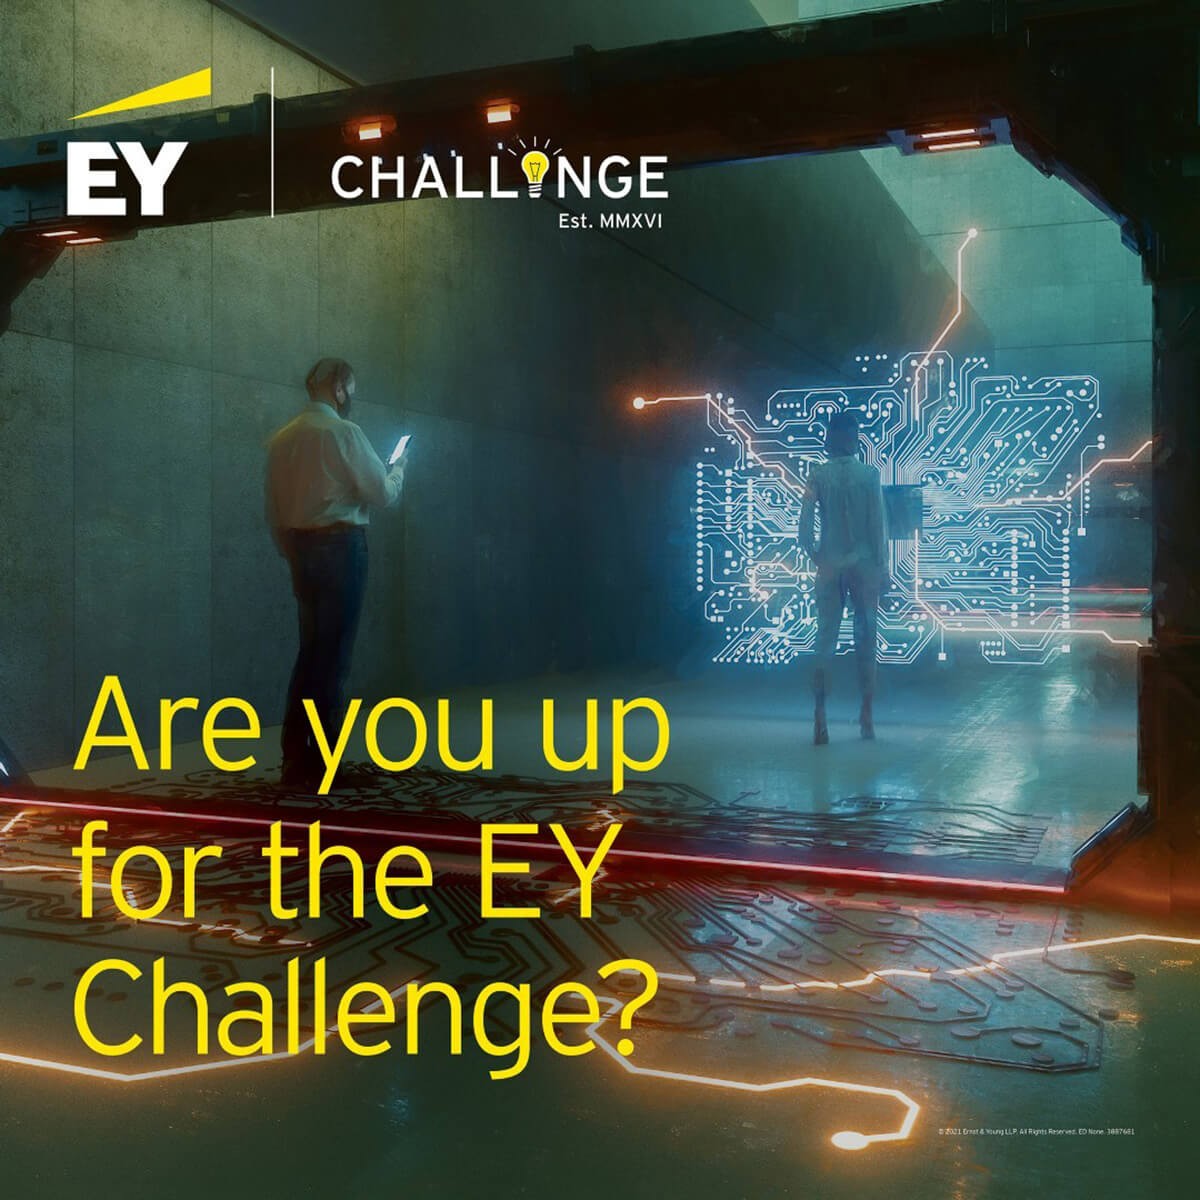 Are you up for the EY Challenge?